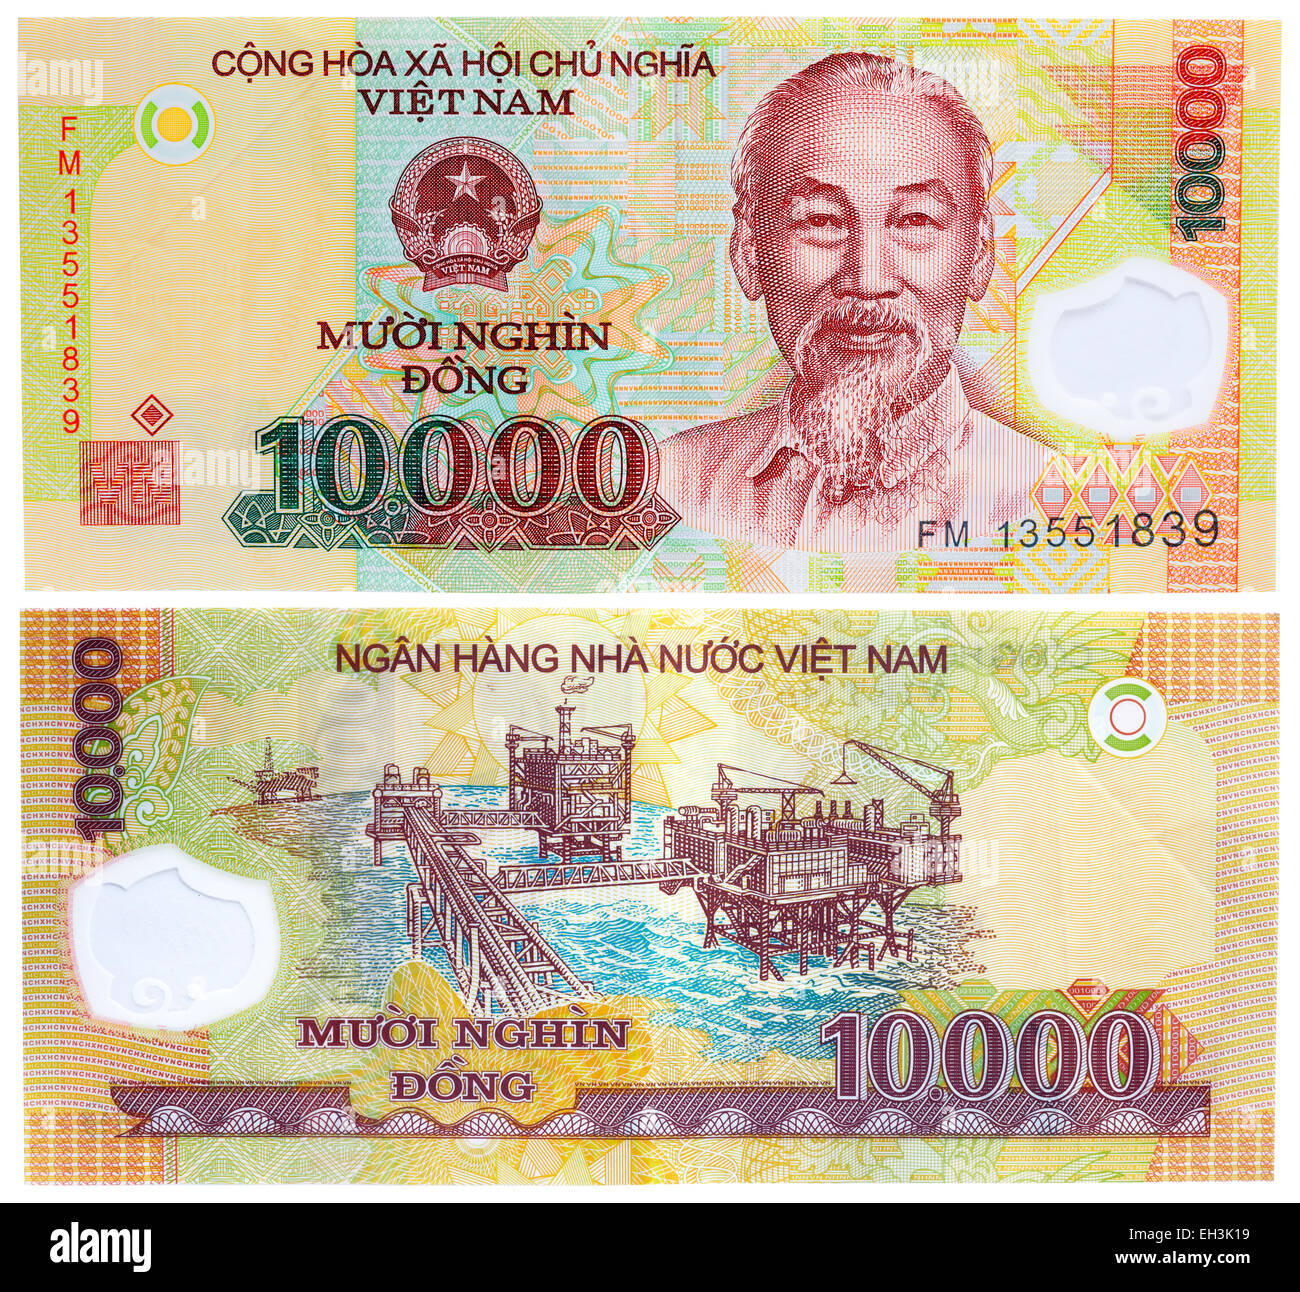 10000 dong banknote, Ho Chi Minh, offshore oil rigs, Vietnam, 2006 Stock Photo